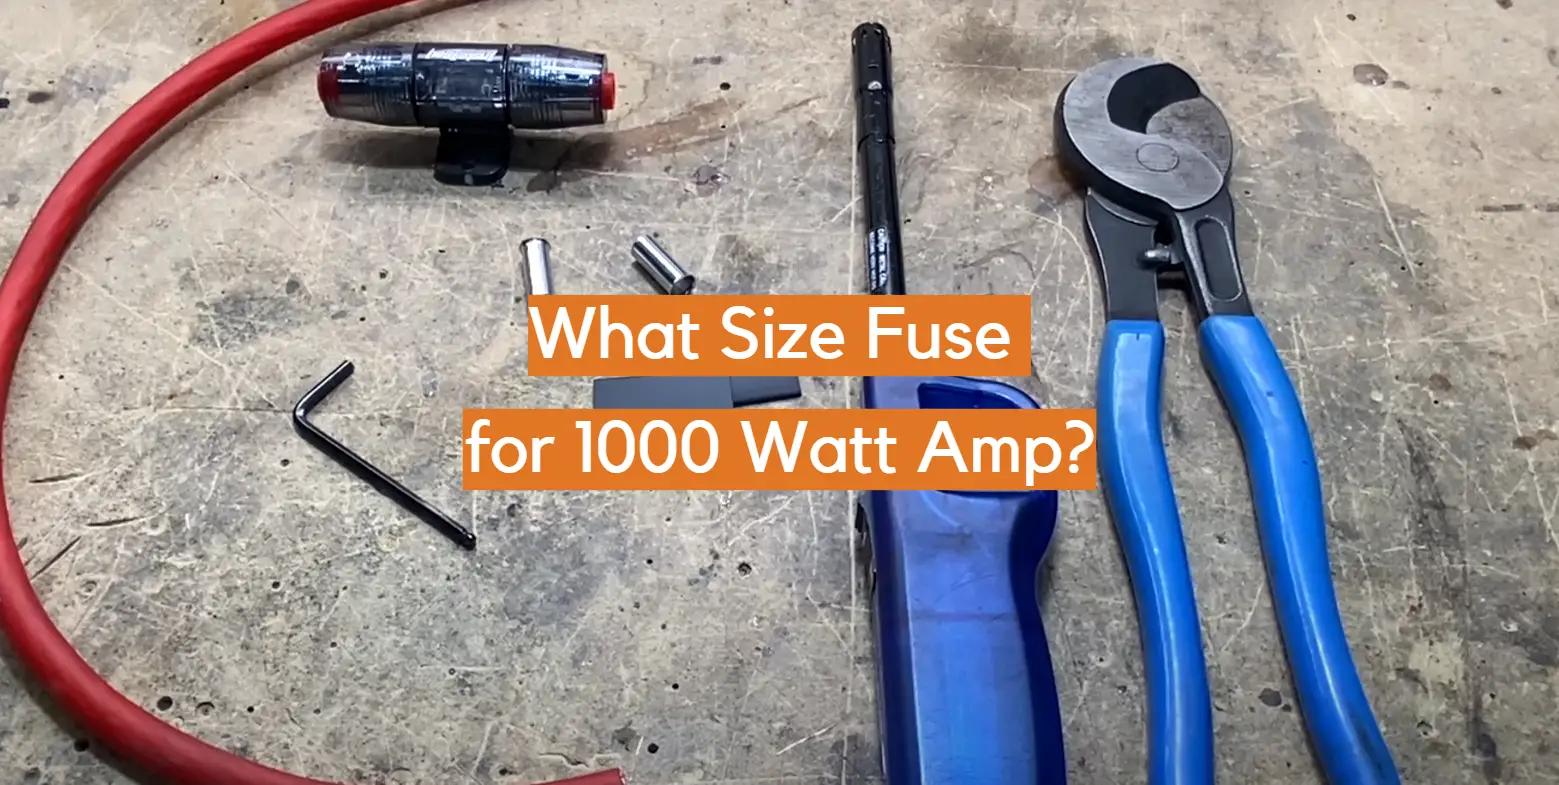 What Size Fuse for 1000 Watt Amp?